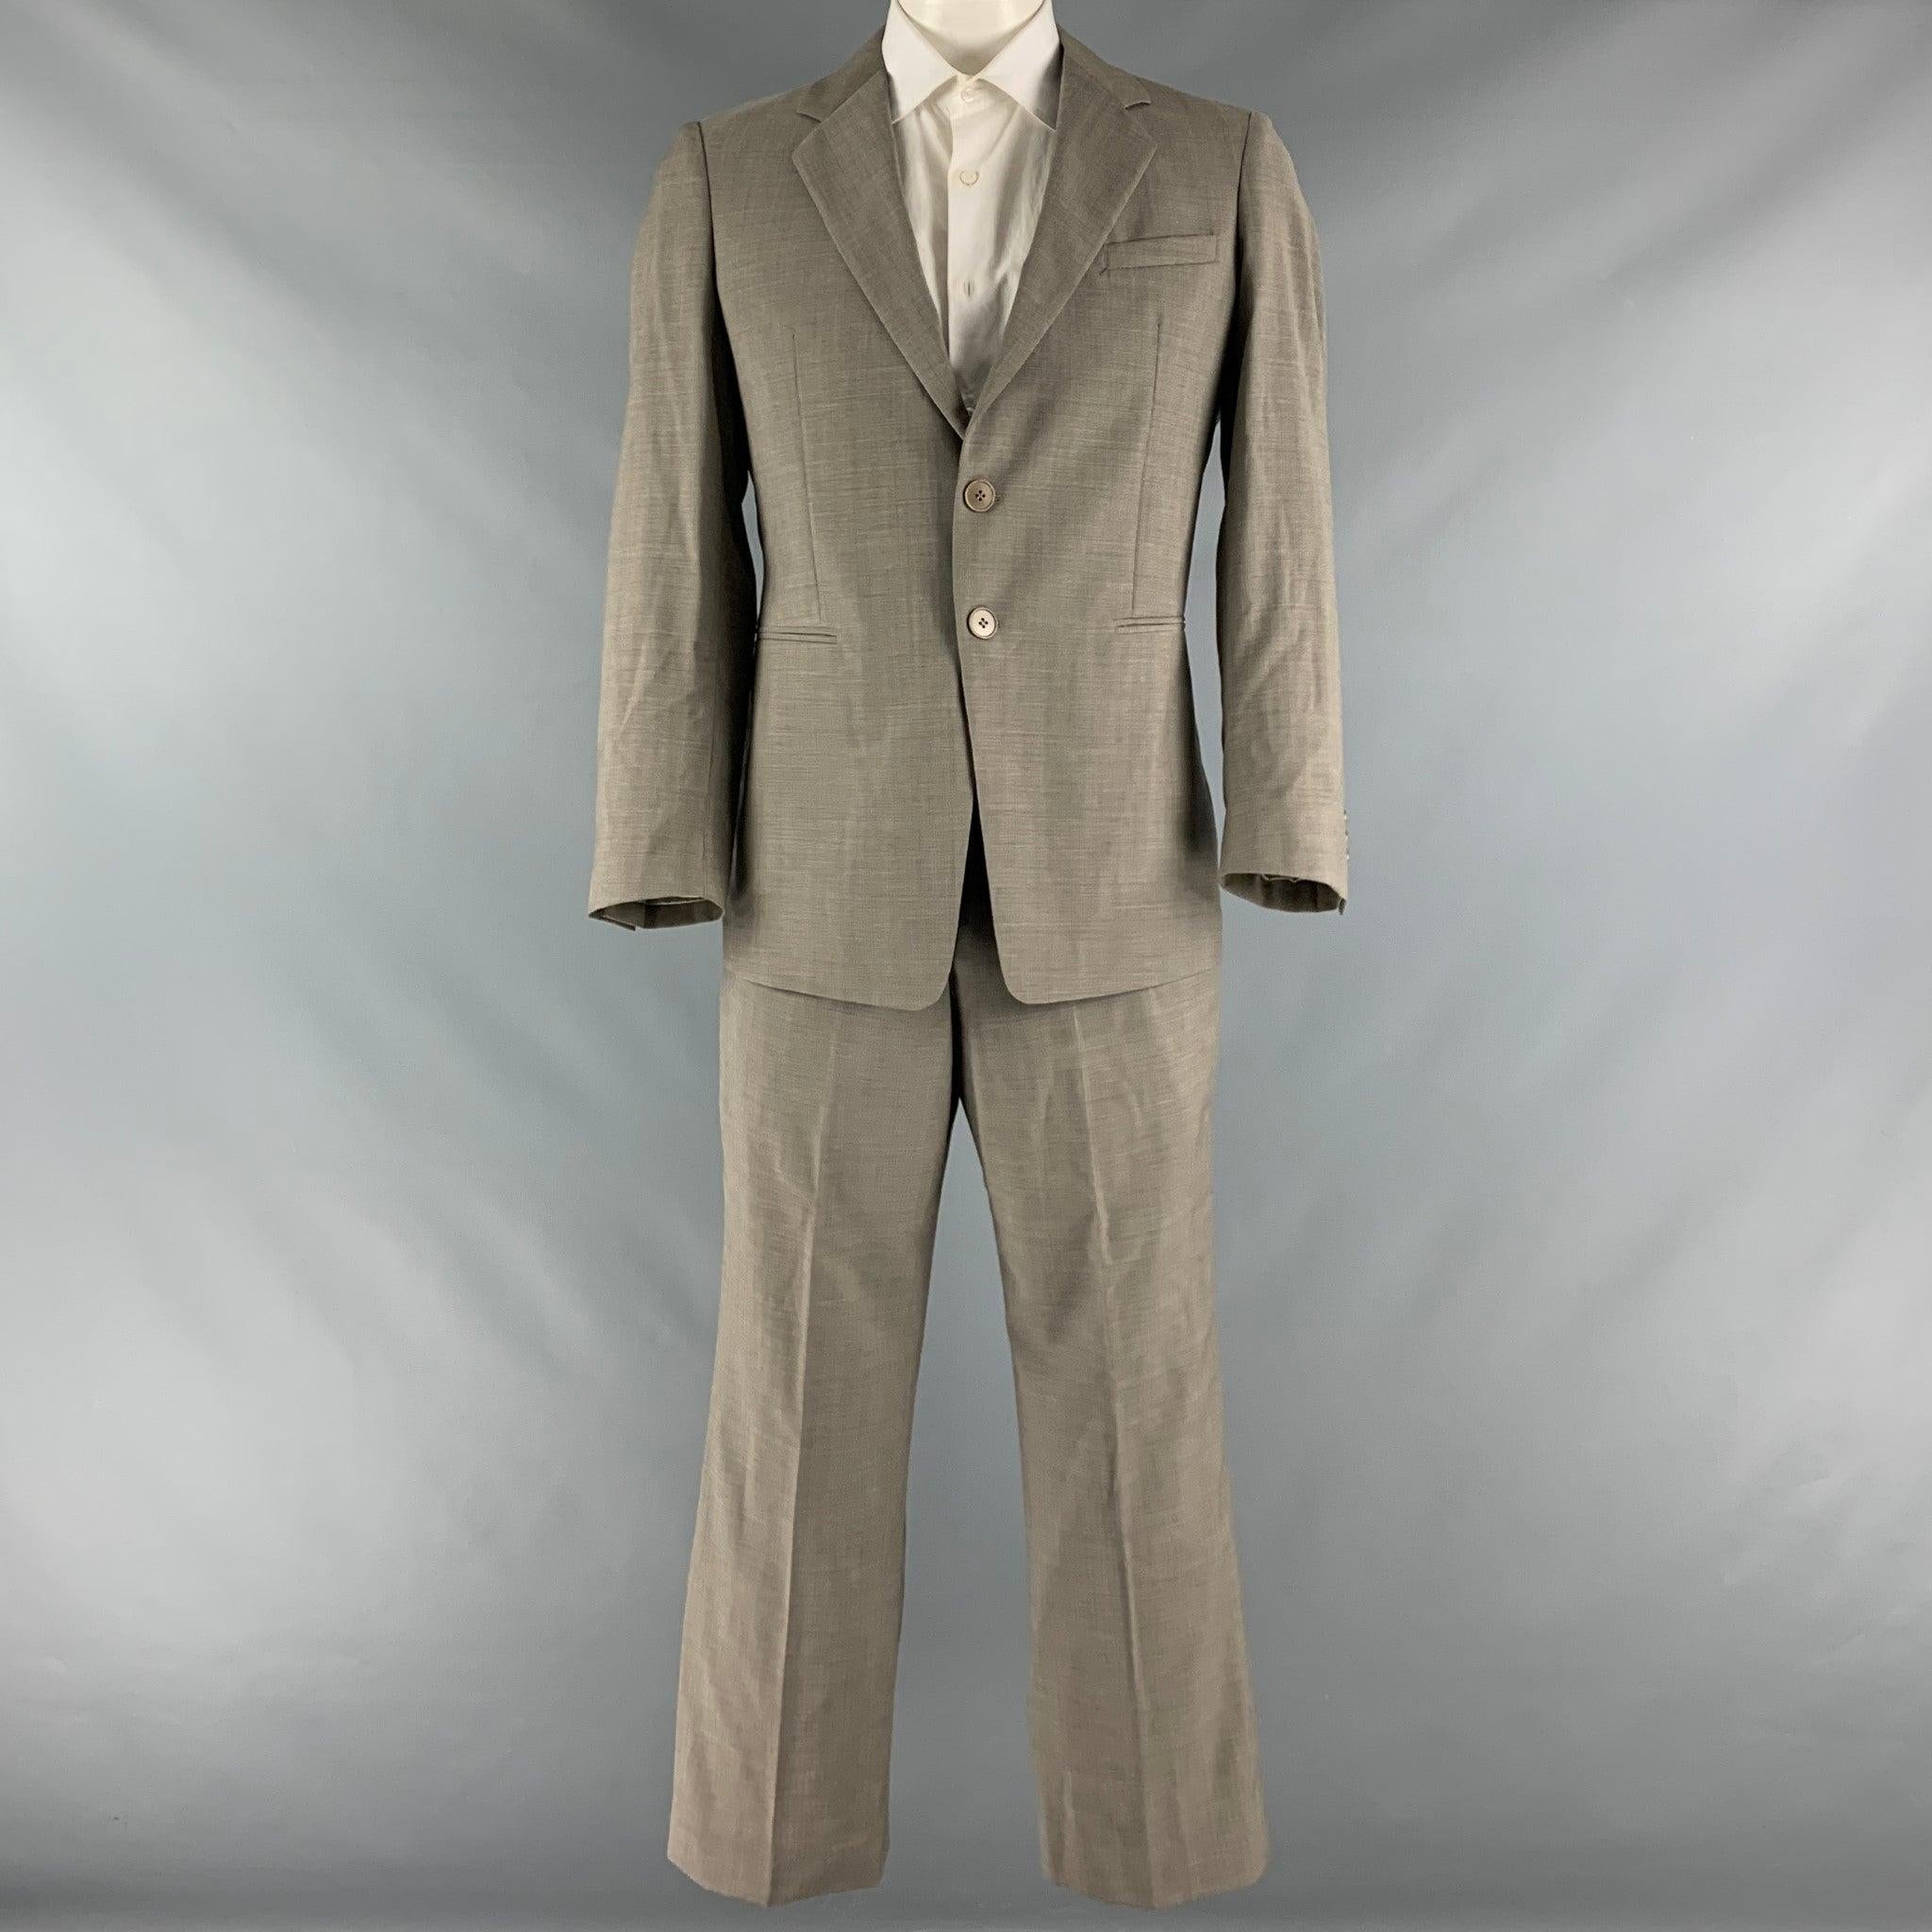 EMPORIO ARMANI suit comes in a taupe wool with a full liner and includes a single breasted, double button sport coat with a notch lapel and matching flat front trousers. Made in Italy.Excellent Pre-Owned Condition. 

Marked:   52/41 

Measurements: